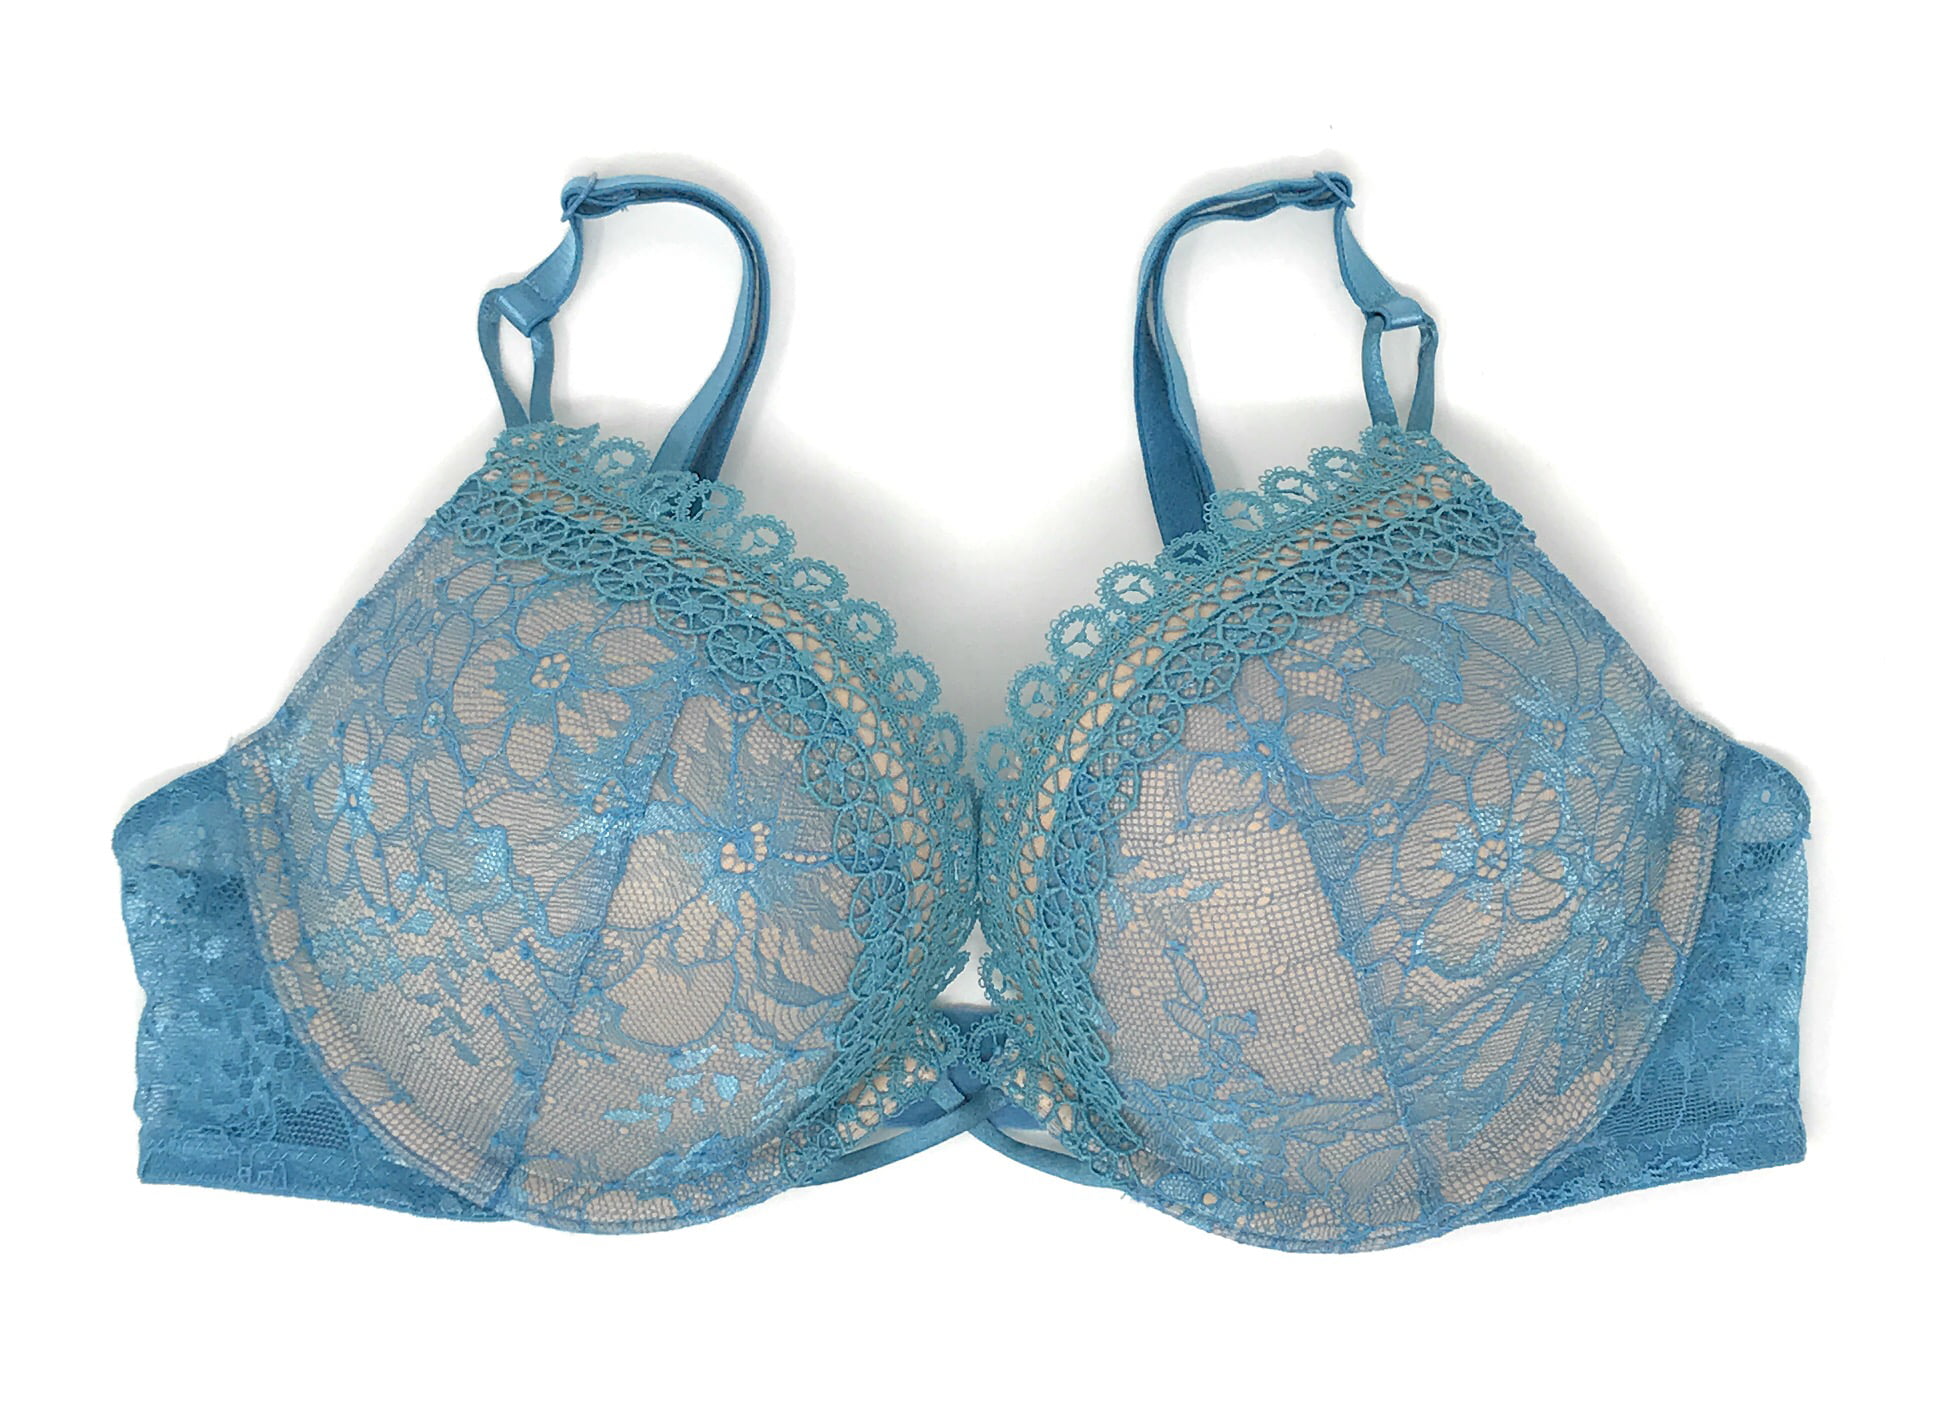 VICTORIA'S SECRET BOMBSHELL ADD-2-CUPS LACE RING STRAP PUSH-UP BRA SET 